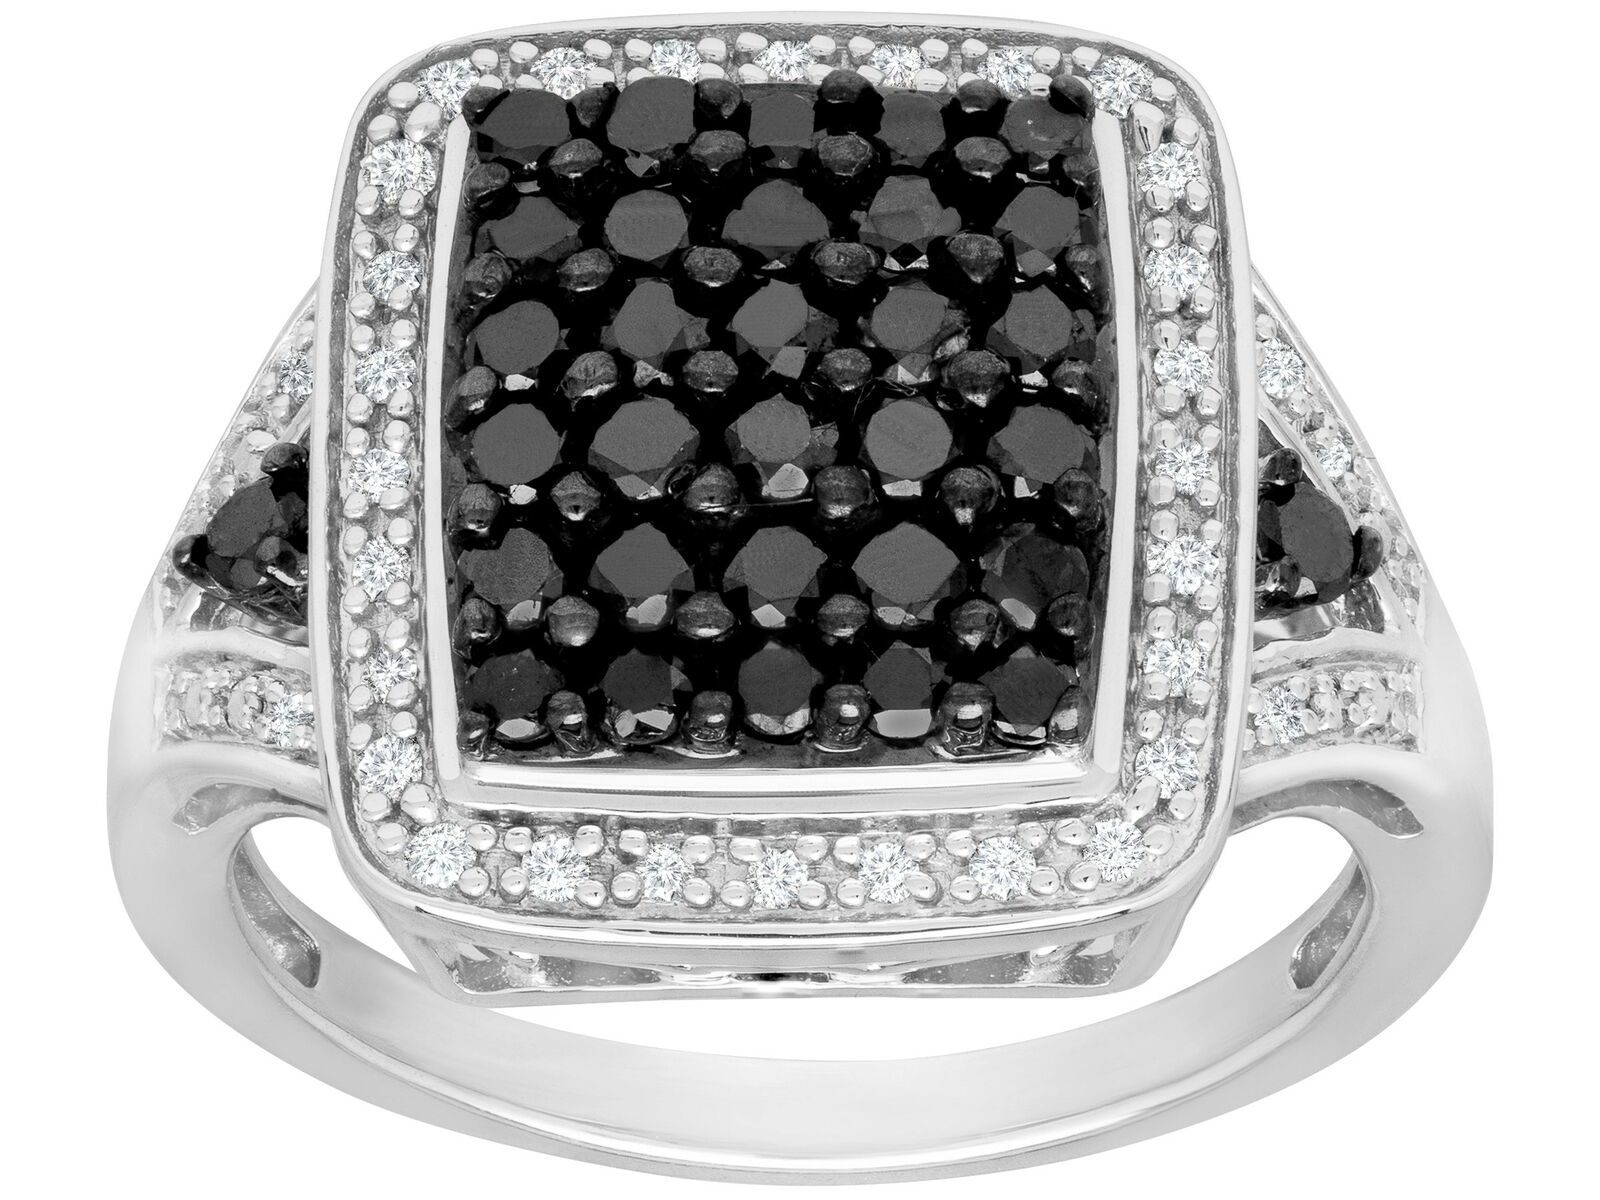 1 ct Black & White Diamond Ring in Sterling Silver